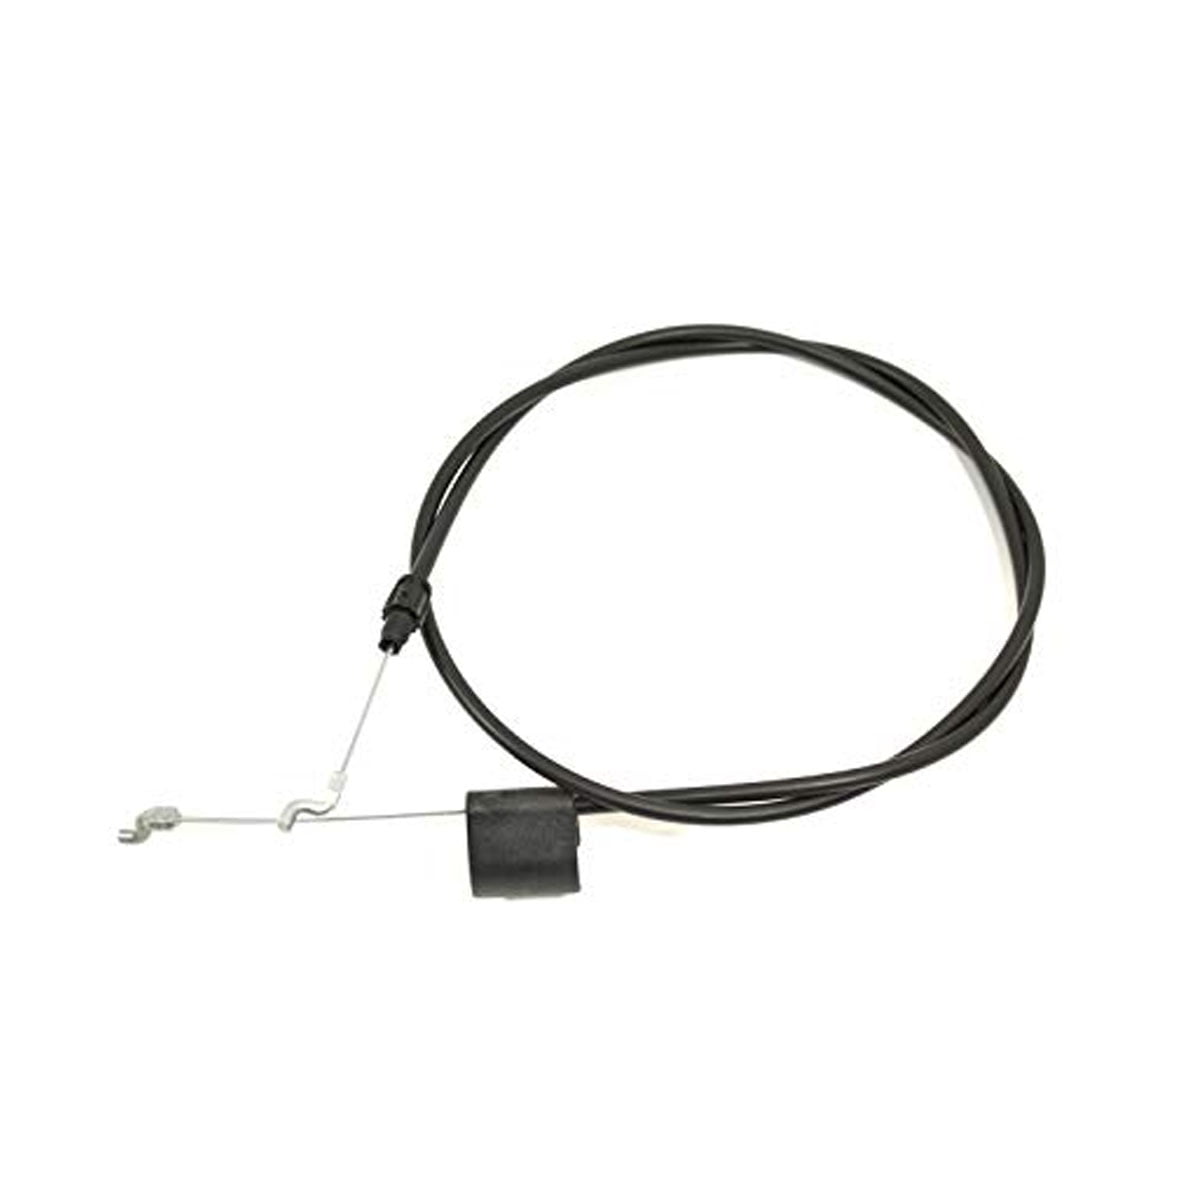 Lawnmower Push Lawn Mower Throttle Pull Cable Engine Control Cable For Husqvarna